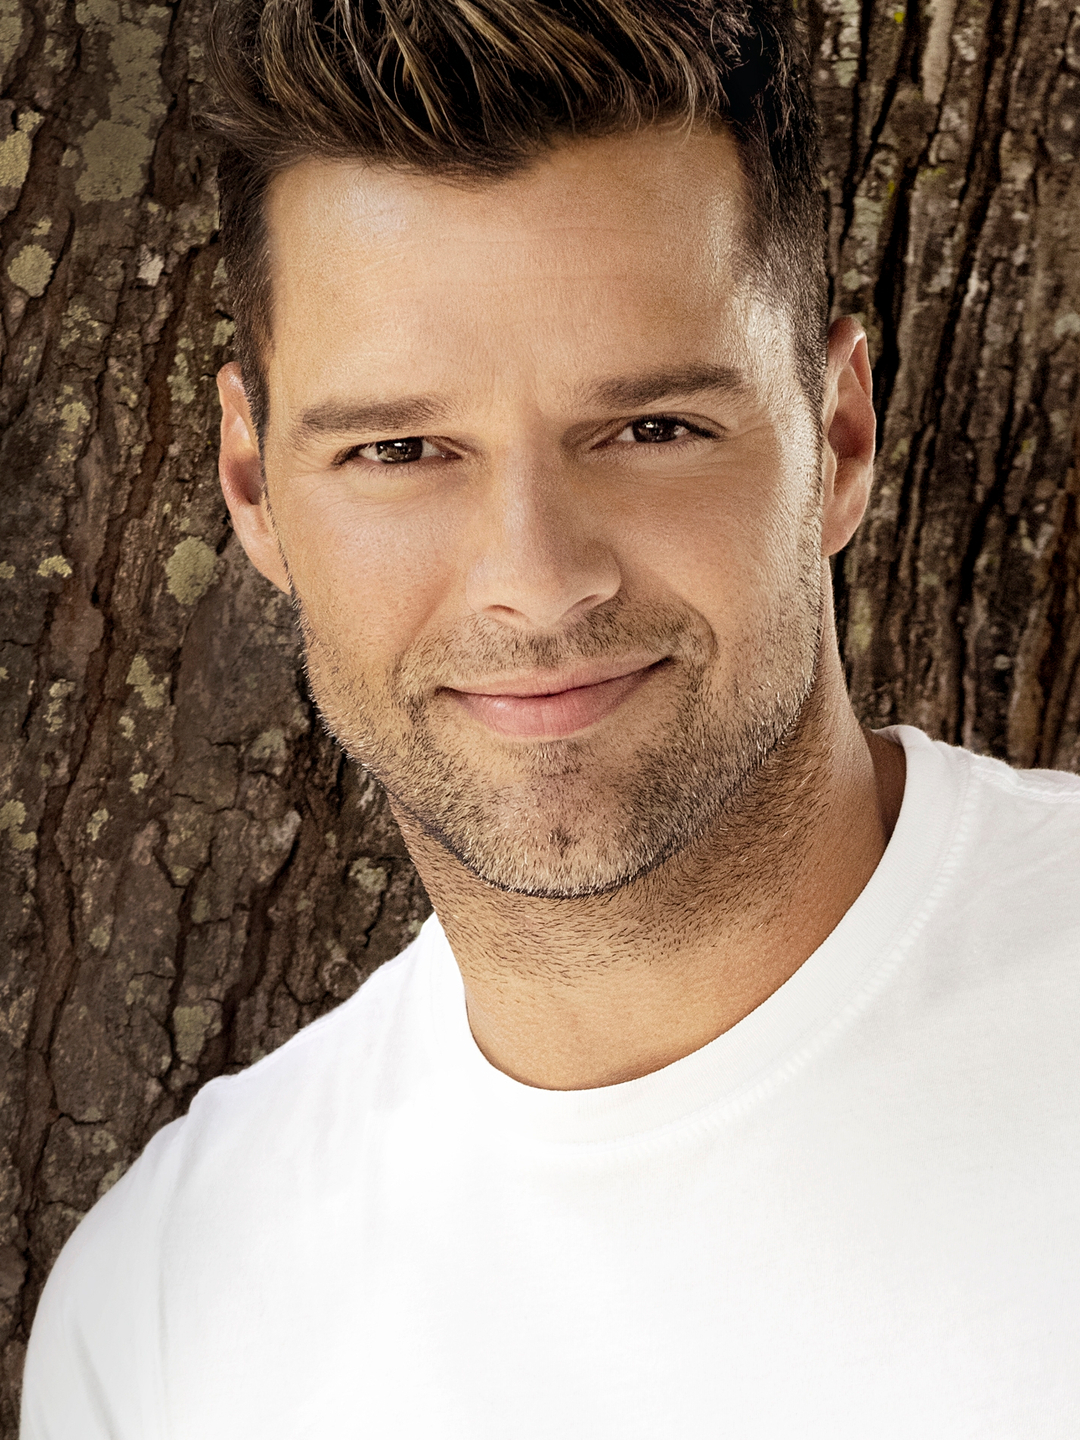 Ricky Martin who is his father